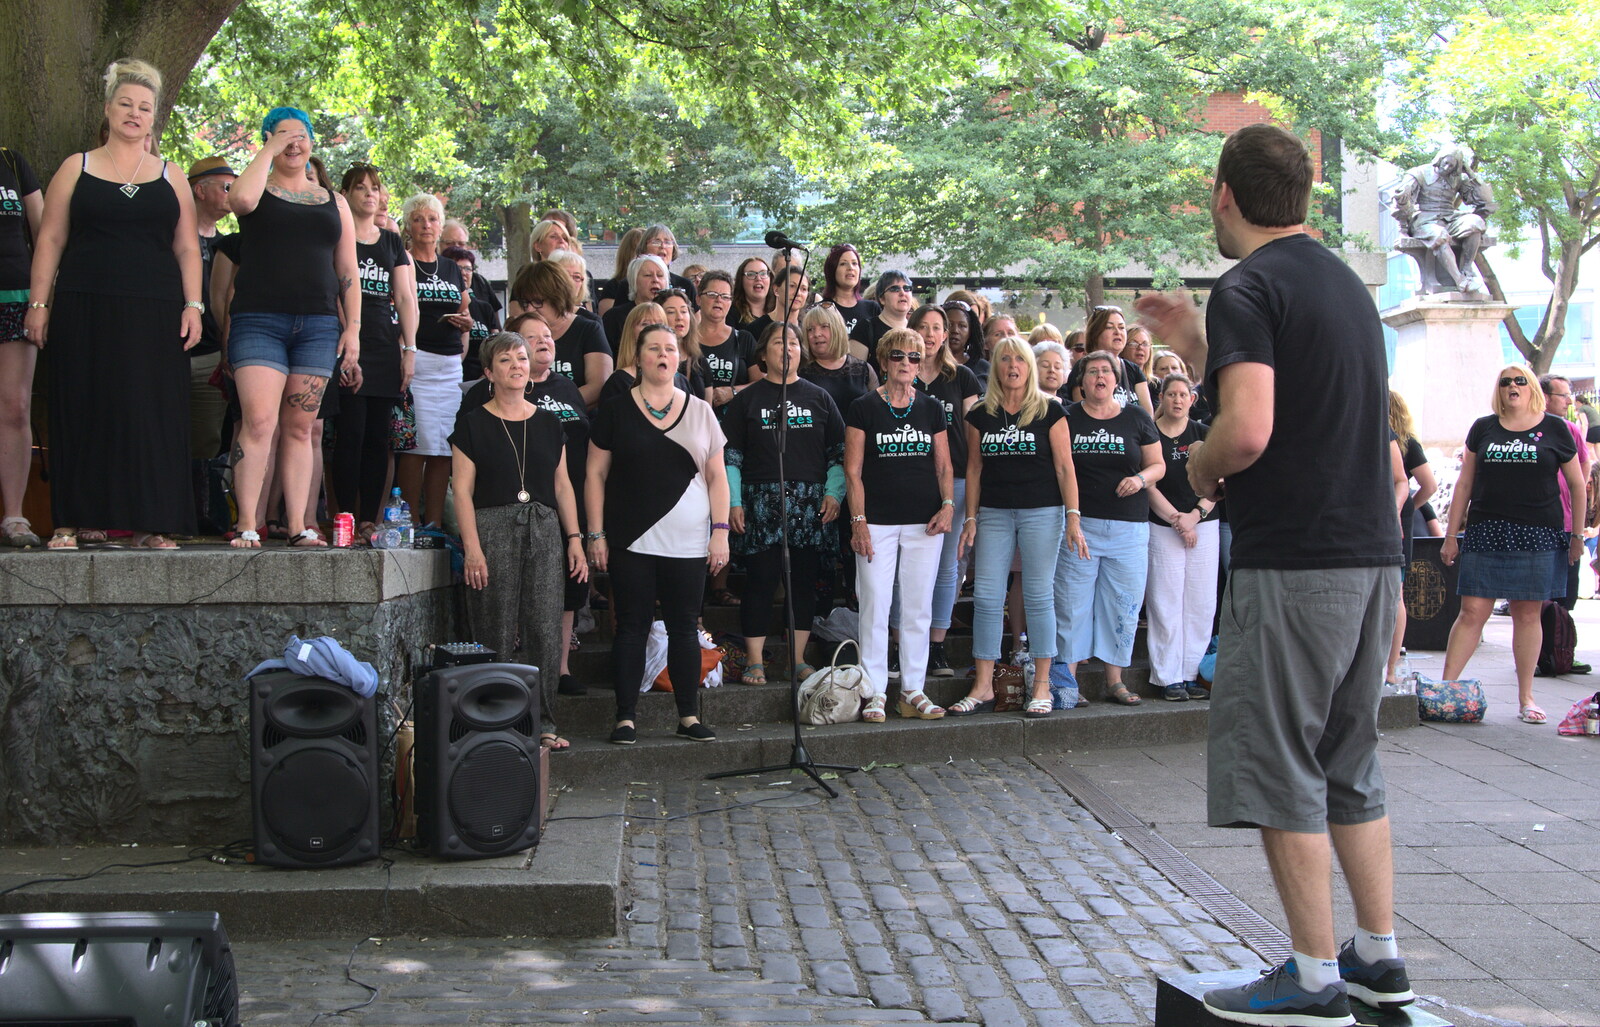 The choir continues singing from Isobel's Choral Flash Mob, Norwich, Norfolk - 17th June 2017